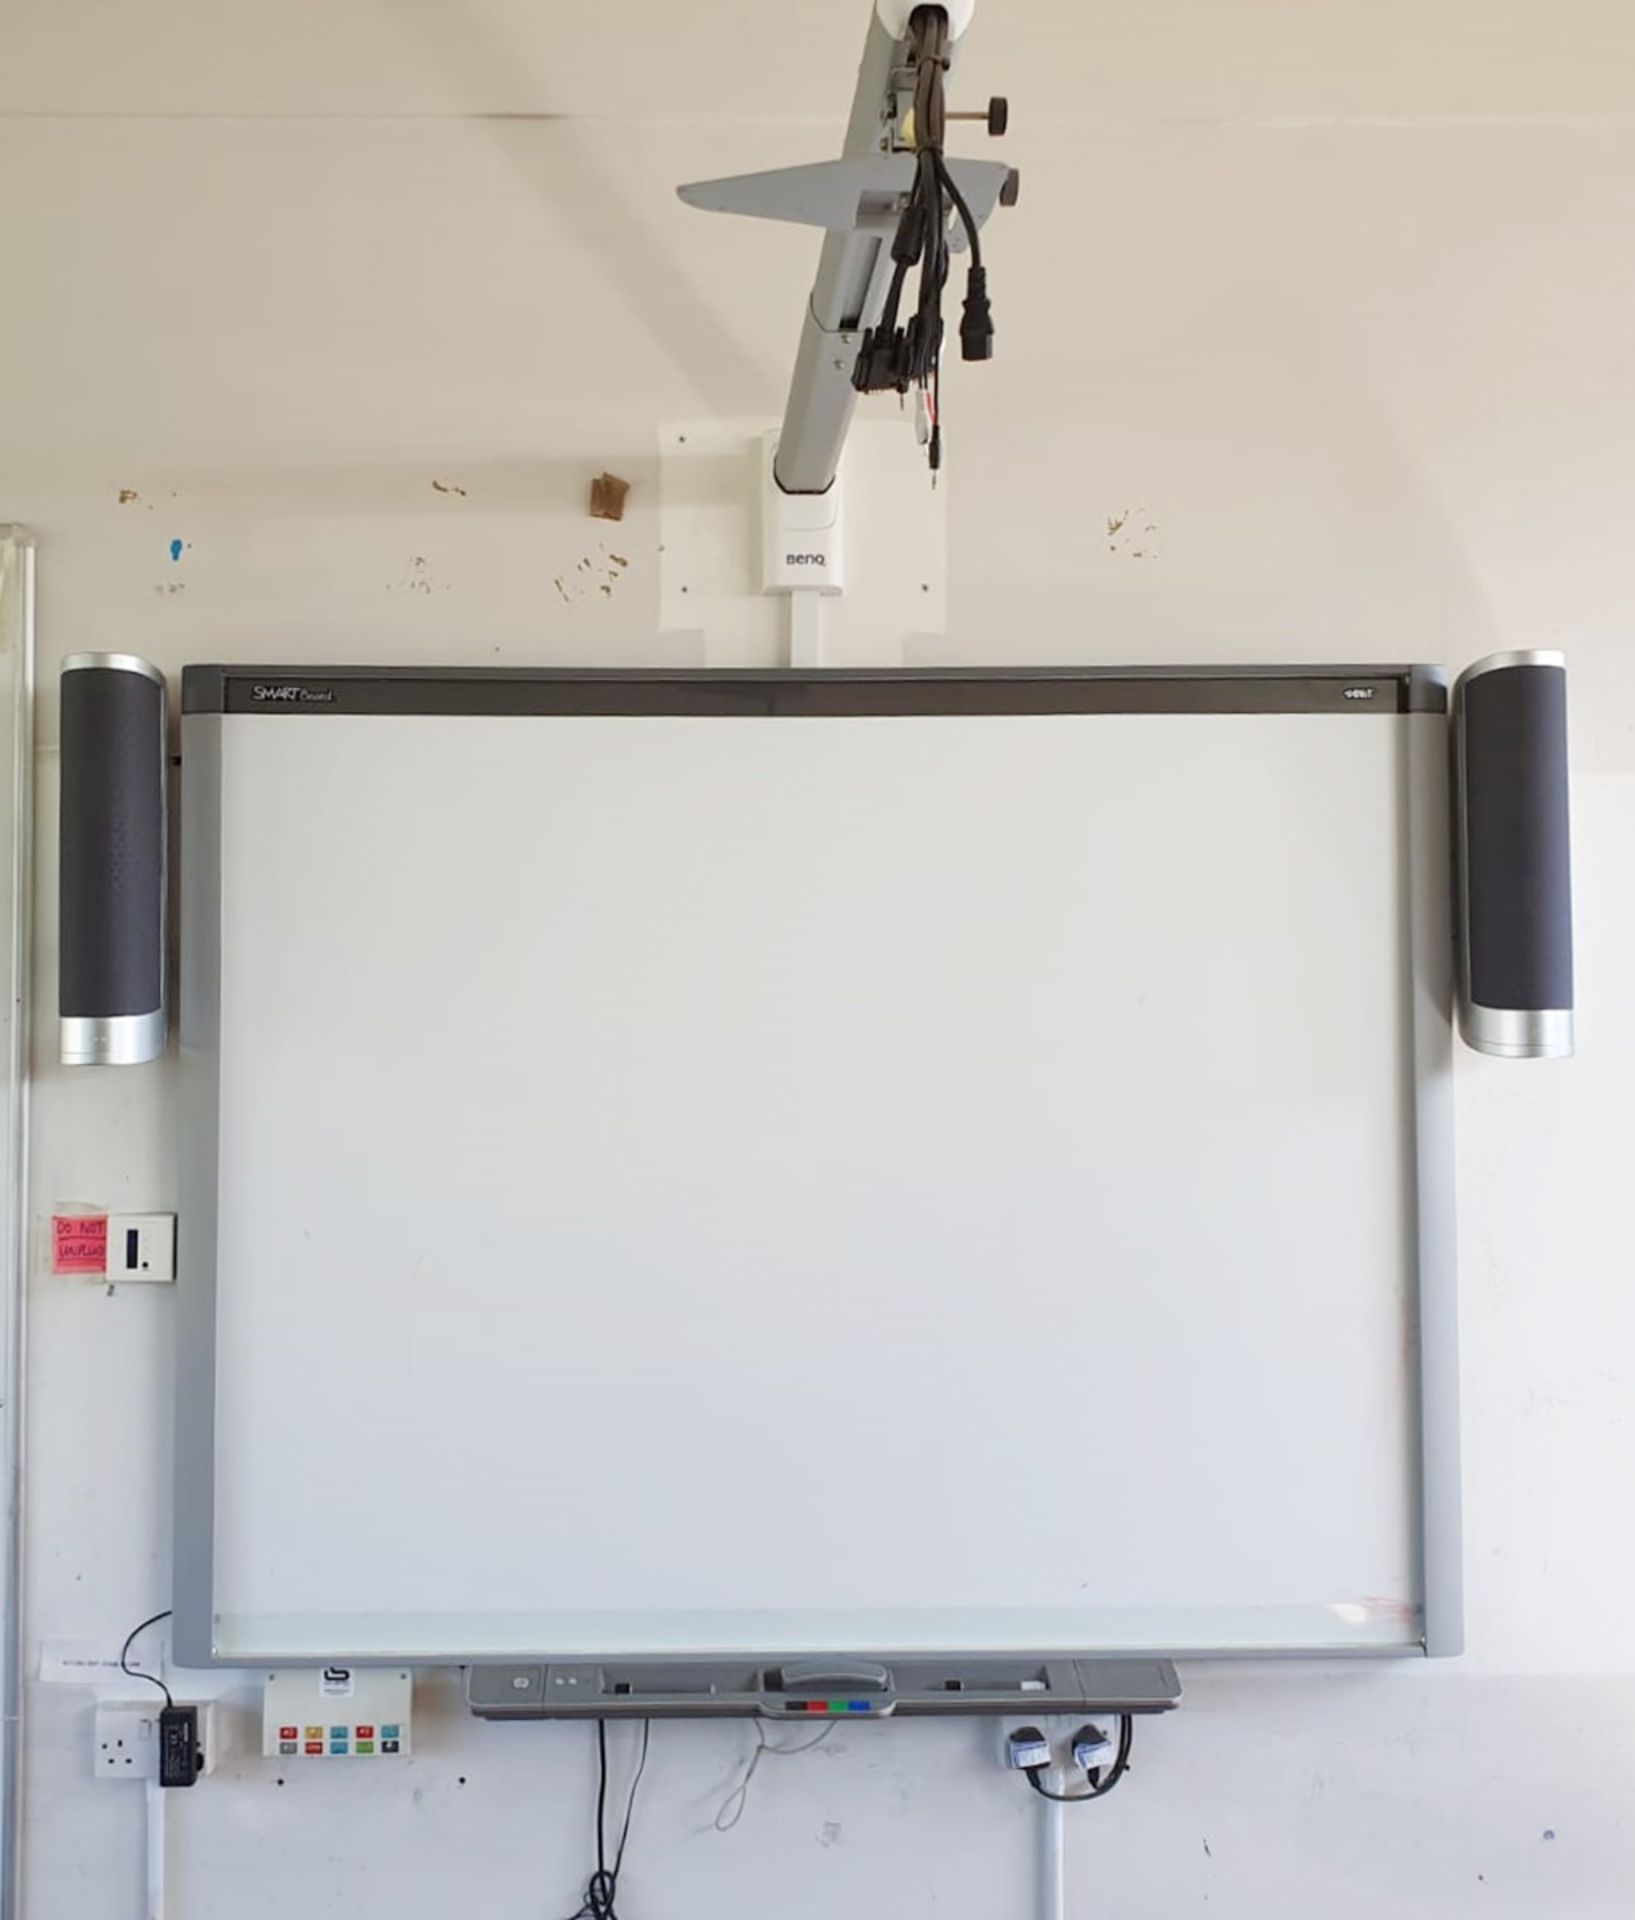 1 x Smart Interactive White Board With UF55 Projector and Speakers - Large Size -CL499 - Location: